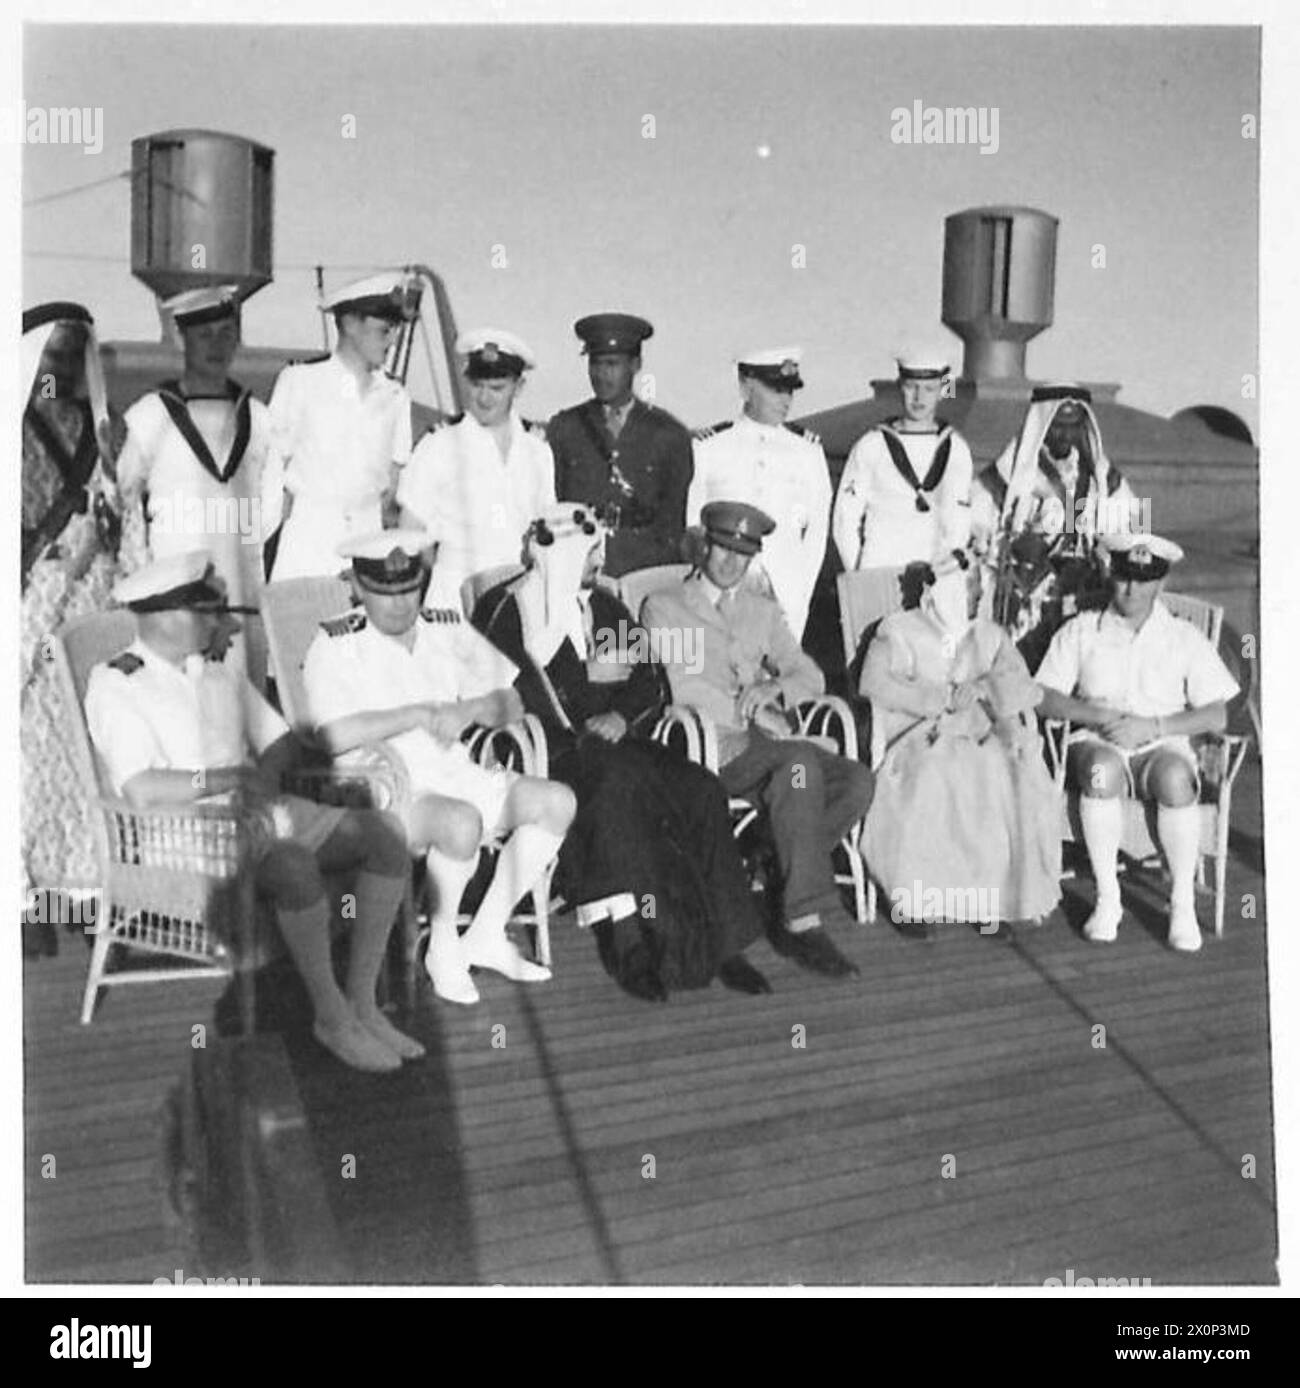 TOUR OF HRH EL EMIR MANSUR IBN SAUD - A group on deck. From left to right:-Back Row: A body-guard, A Naval Able Seaman, Lieutenant D A Holbrook NR, Purser W H Powers, Lieutenant M Diab Interpreter, Chief Engineer of the ship W Neilson, a Naval Able Seaman, a Body-guard.Front Row: Captain L C Barry RN, Captain C B Barry, DSO. RN, in charge of Naval Escort, His Royal Highness Emir Mansur bin 'Abd al-'Aziz, Captain P A Uniacke, acting as Liaison Officer, Dr Midhat Sheikh Al Ardh, Medical Adviser of HHR Emir Mansur bin 'Abd al'Aziz, Lieutenant Commander R M Marshall, RNVR Medical Officer Stock Photo